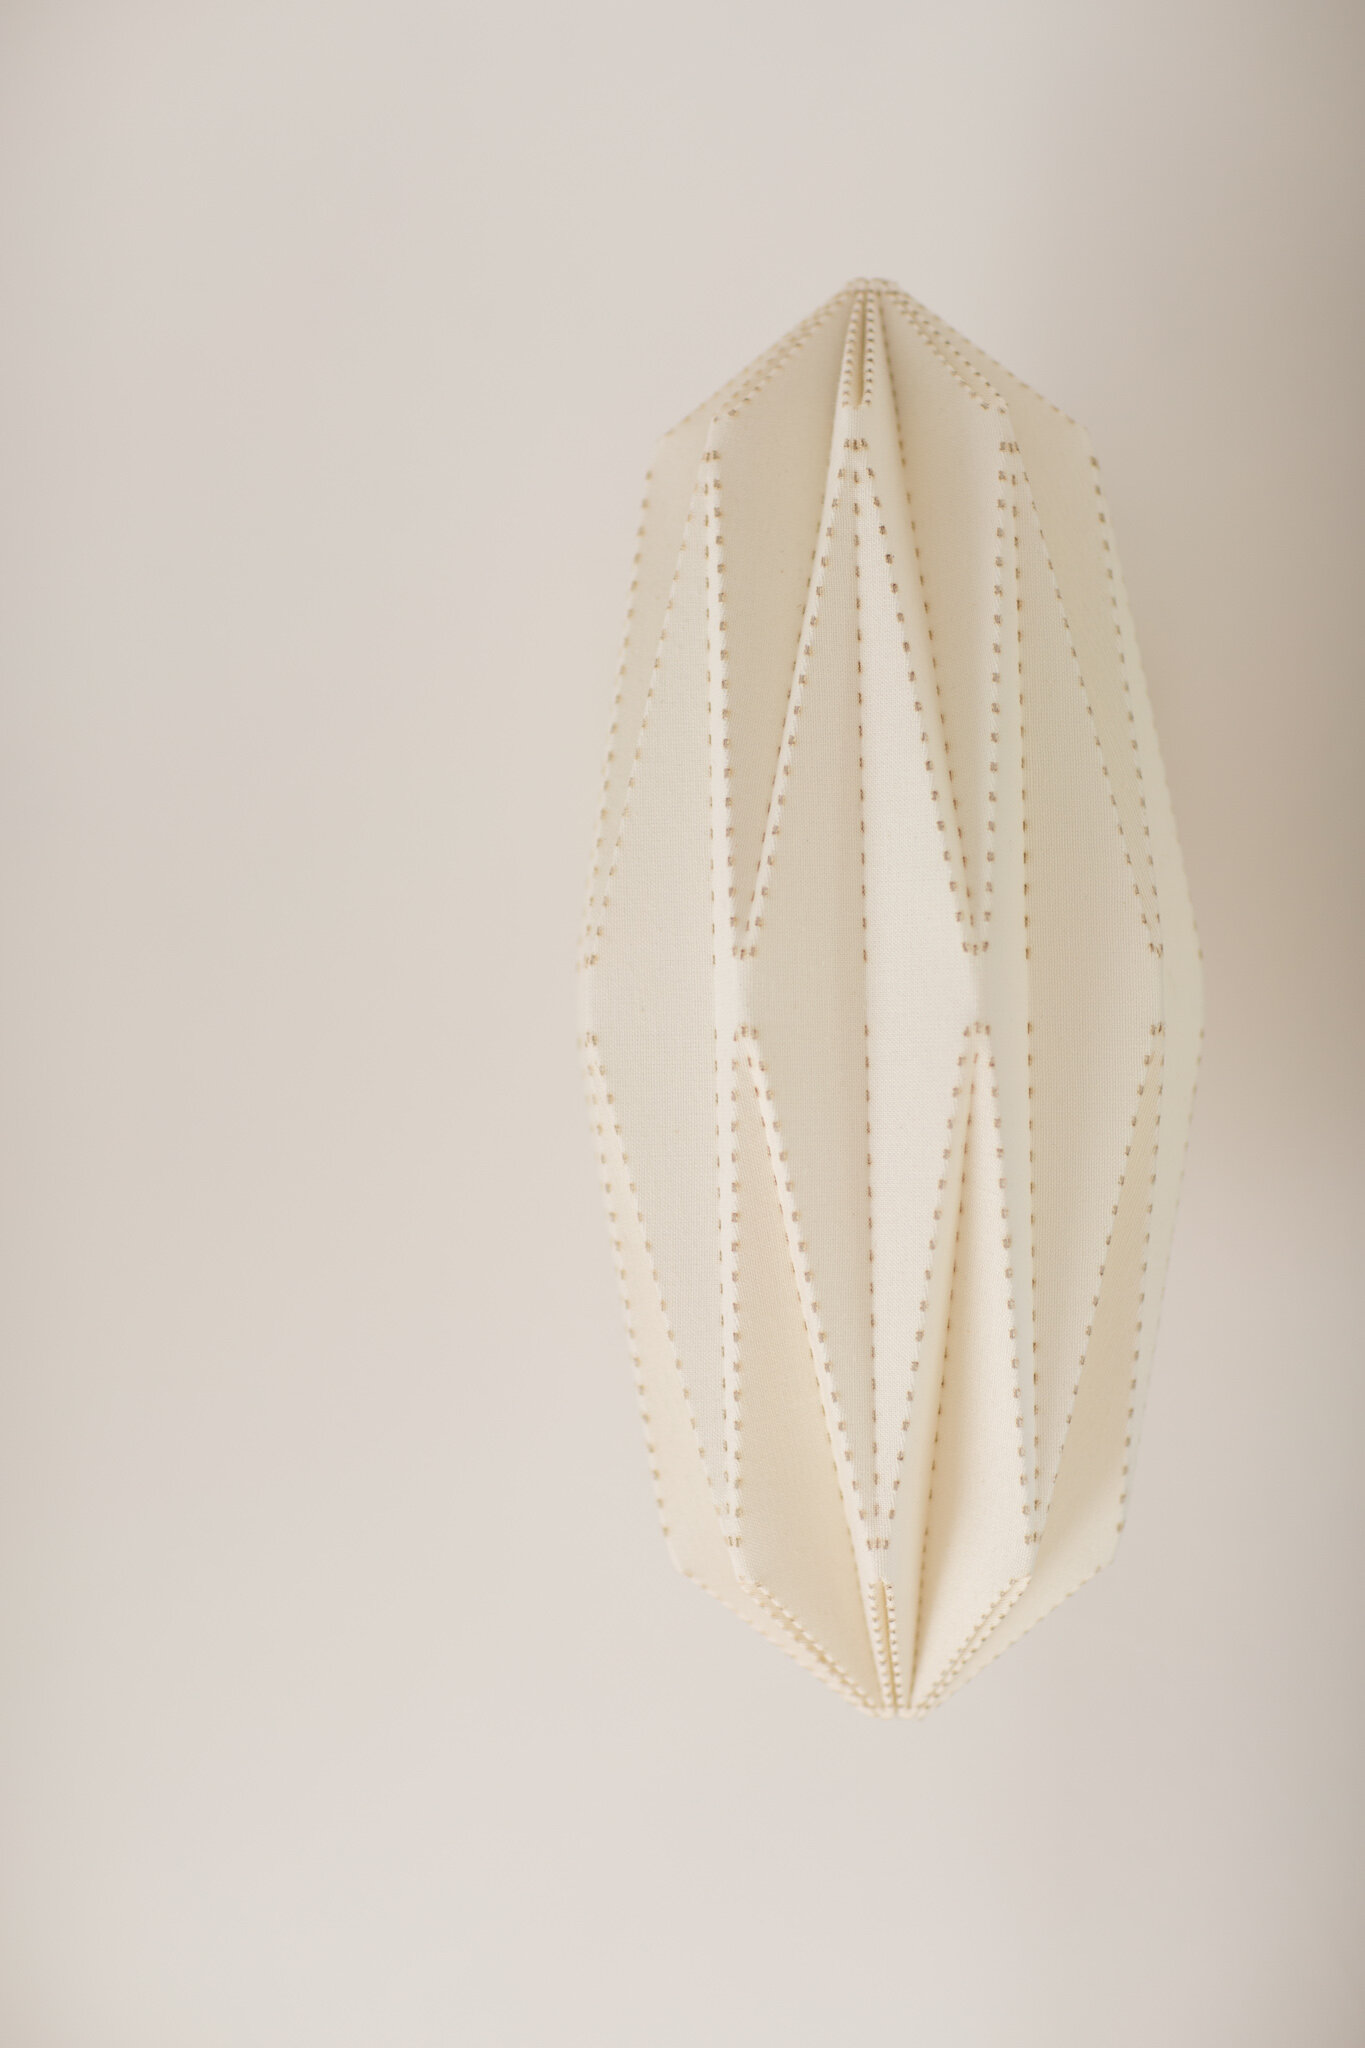  This pleated linen shade has a soothing glow and is made in CA by California Workshop for Room and Board. 